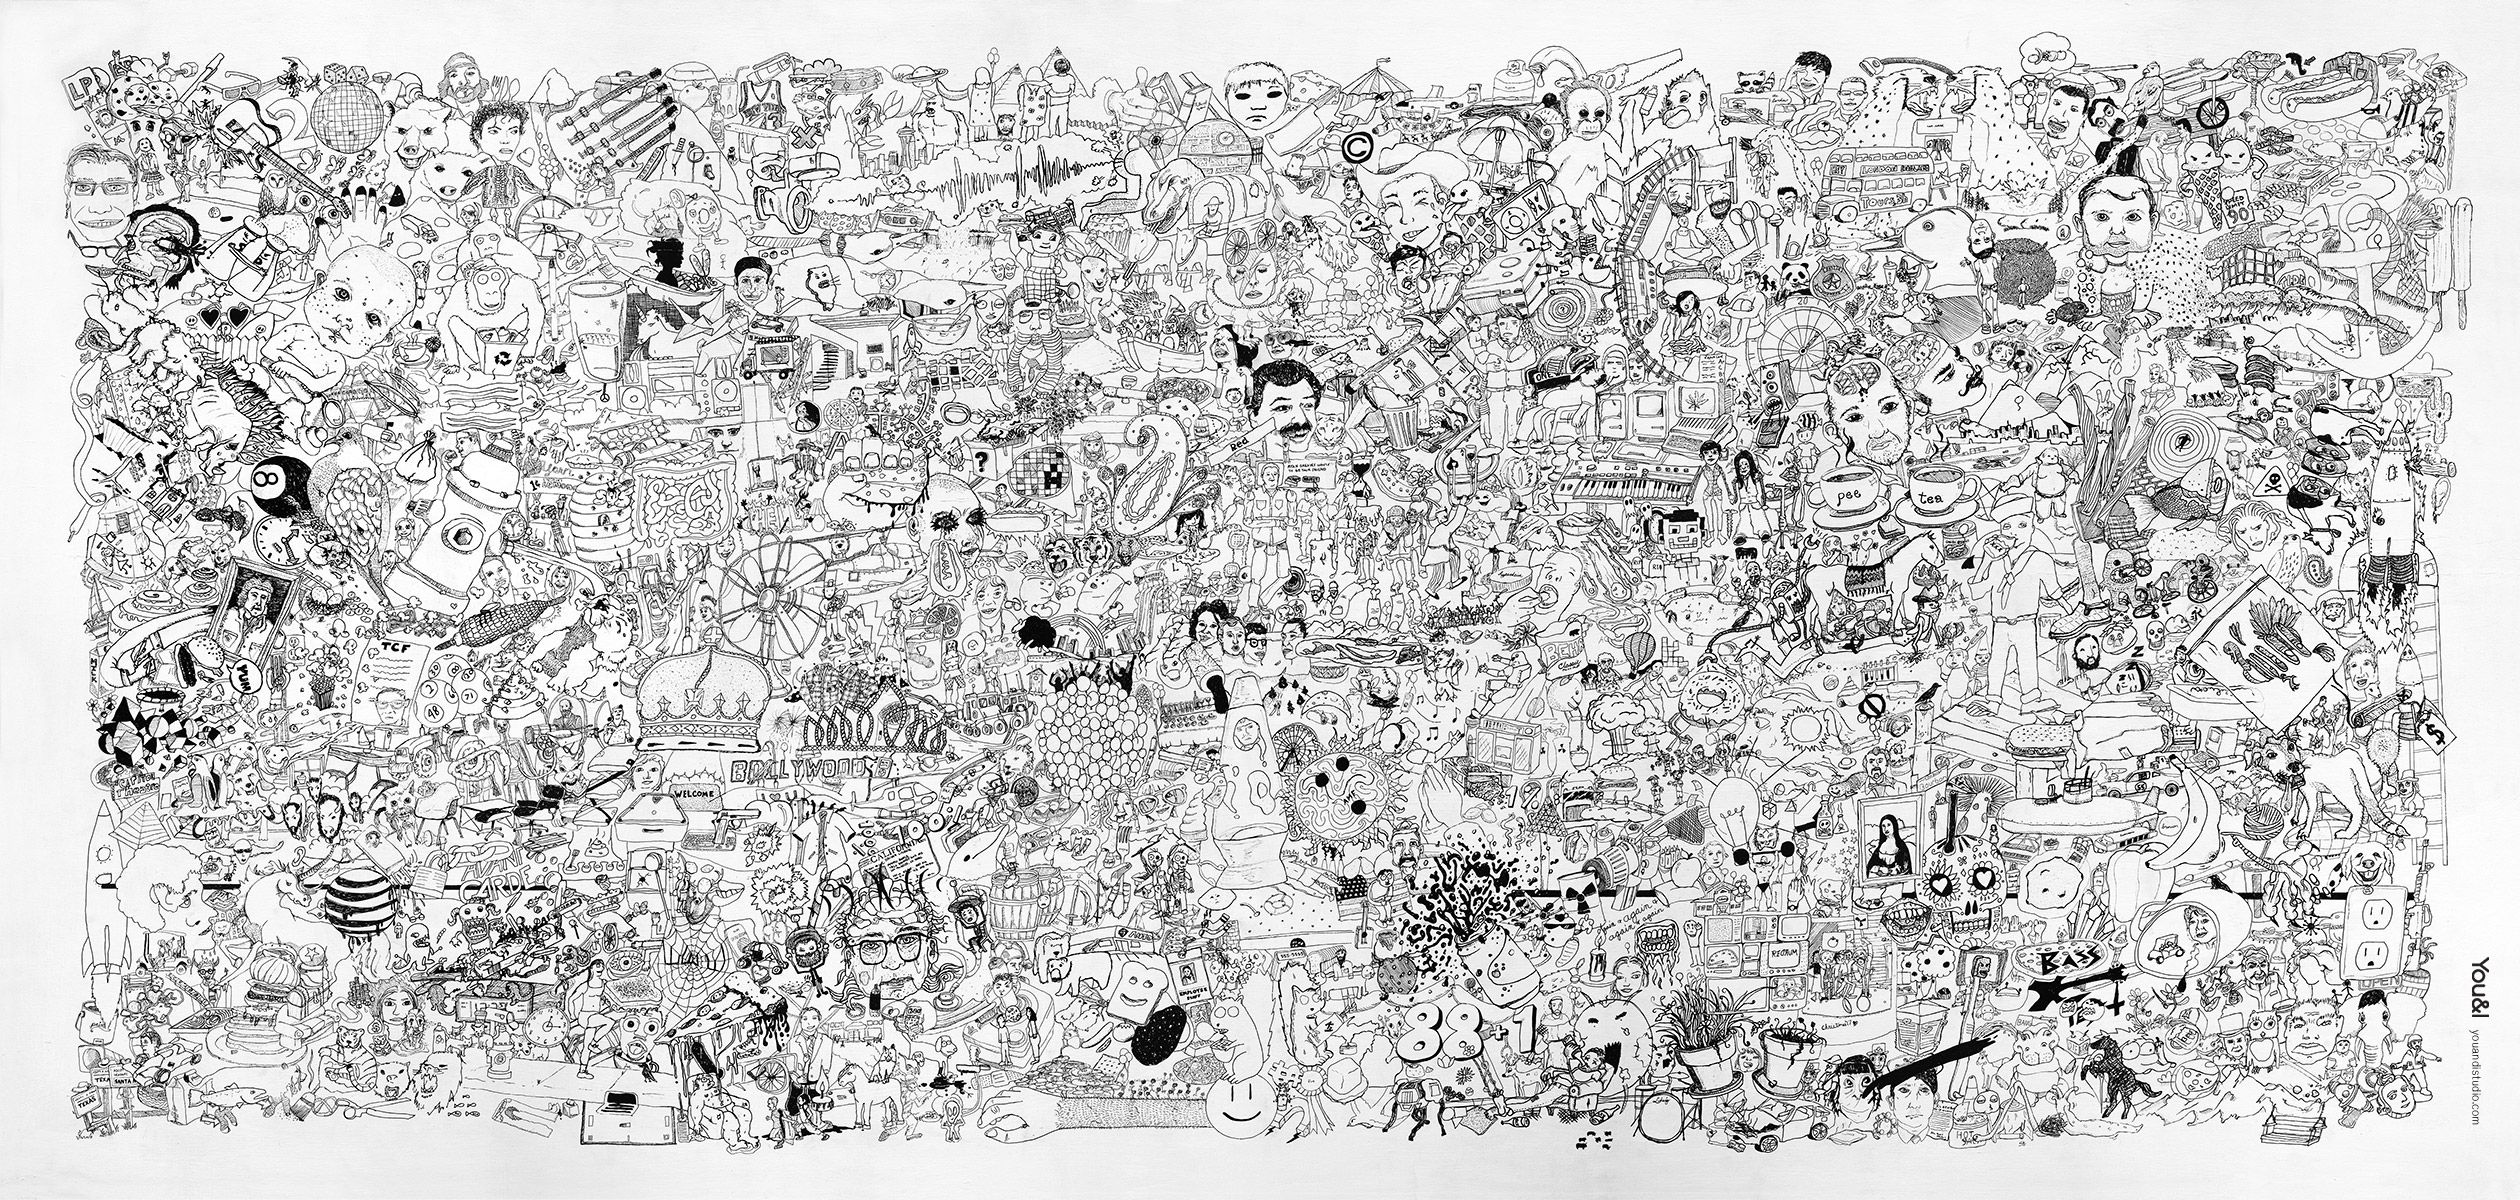 Cool Drawing Wallpaper Draw Wallpaper, Awesome 35 Draw Wallpaper